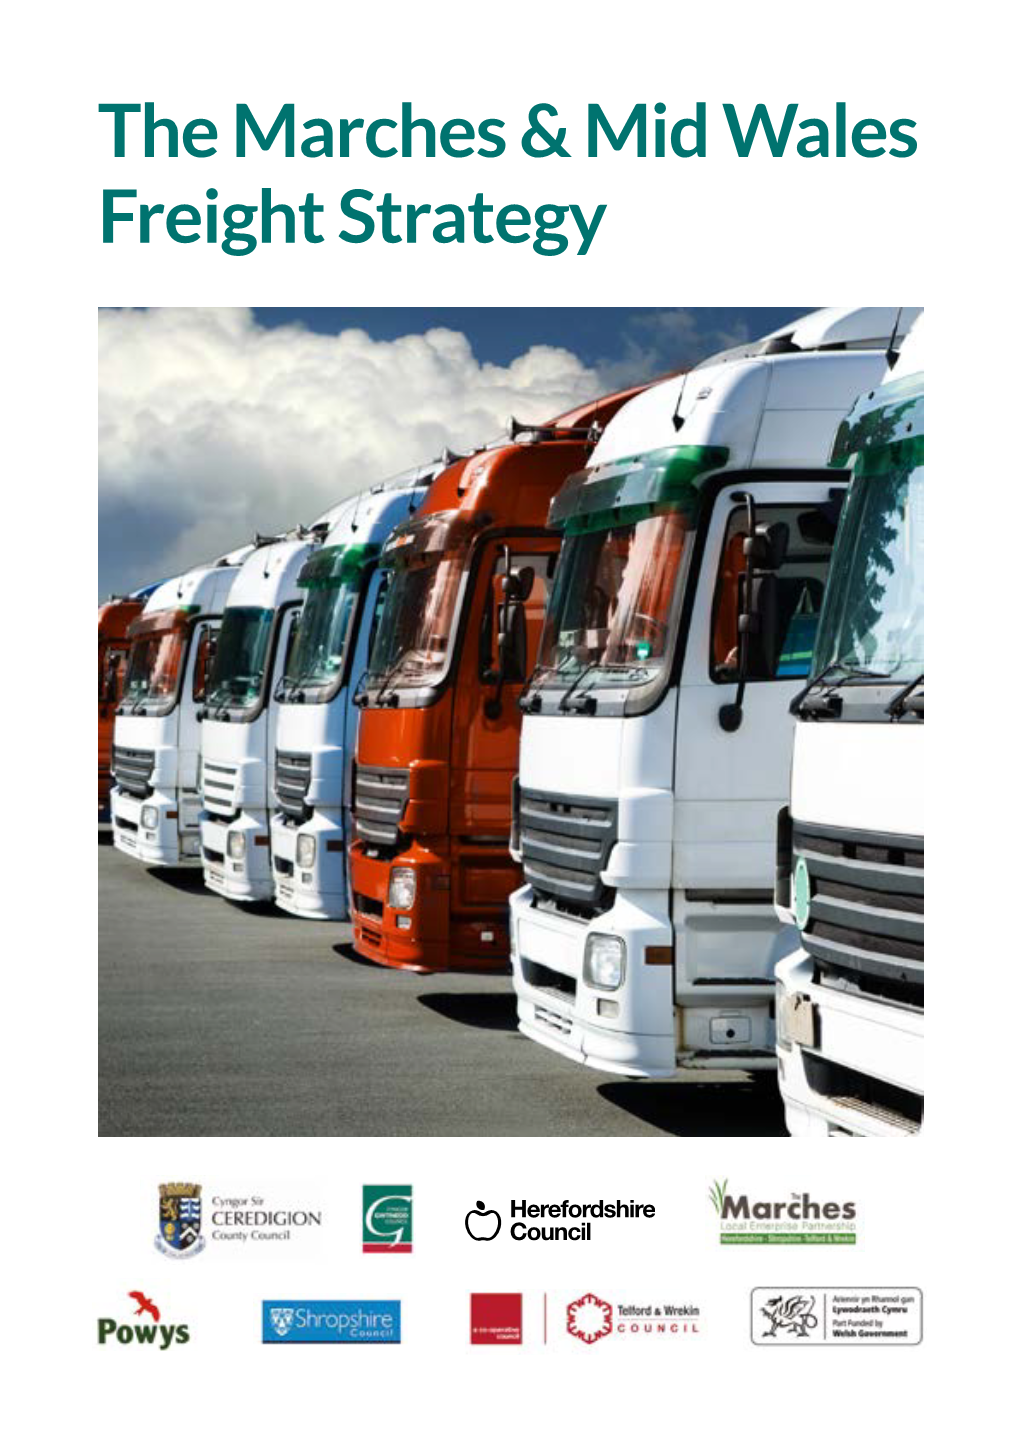 The Marches & Mid Wales Freight Strategy